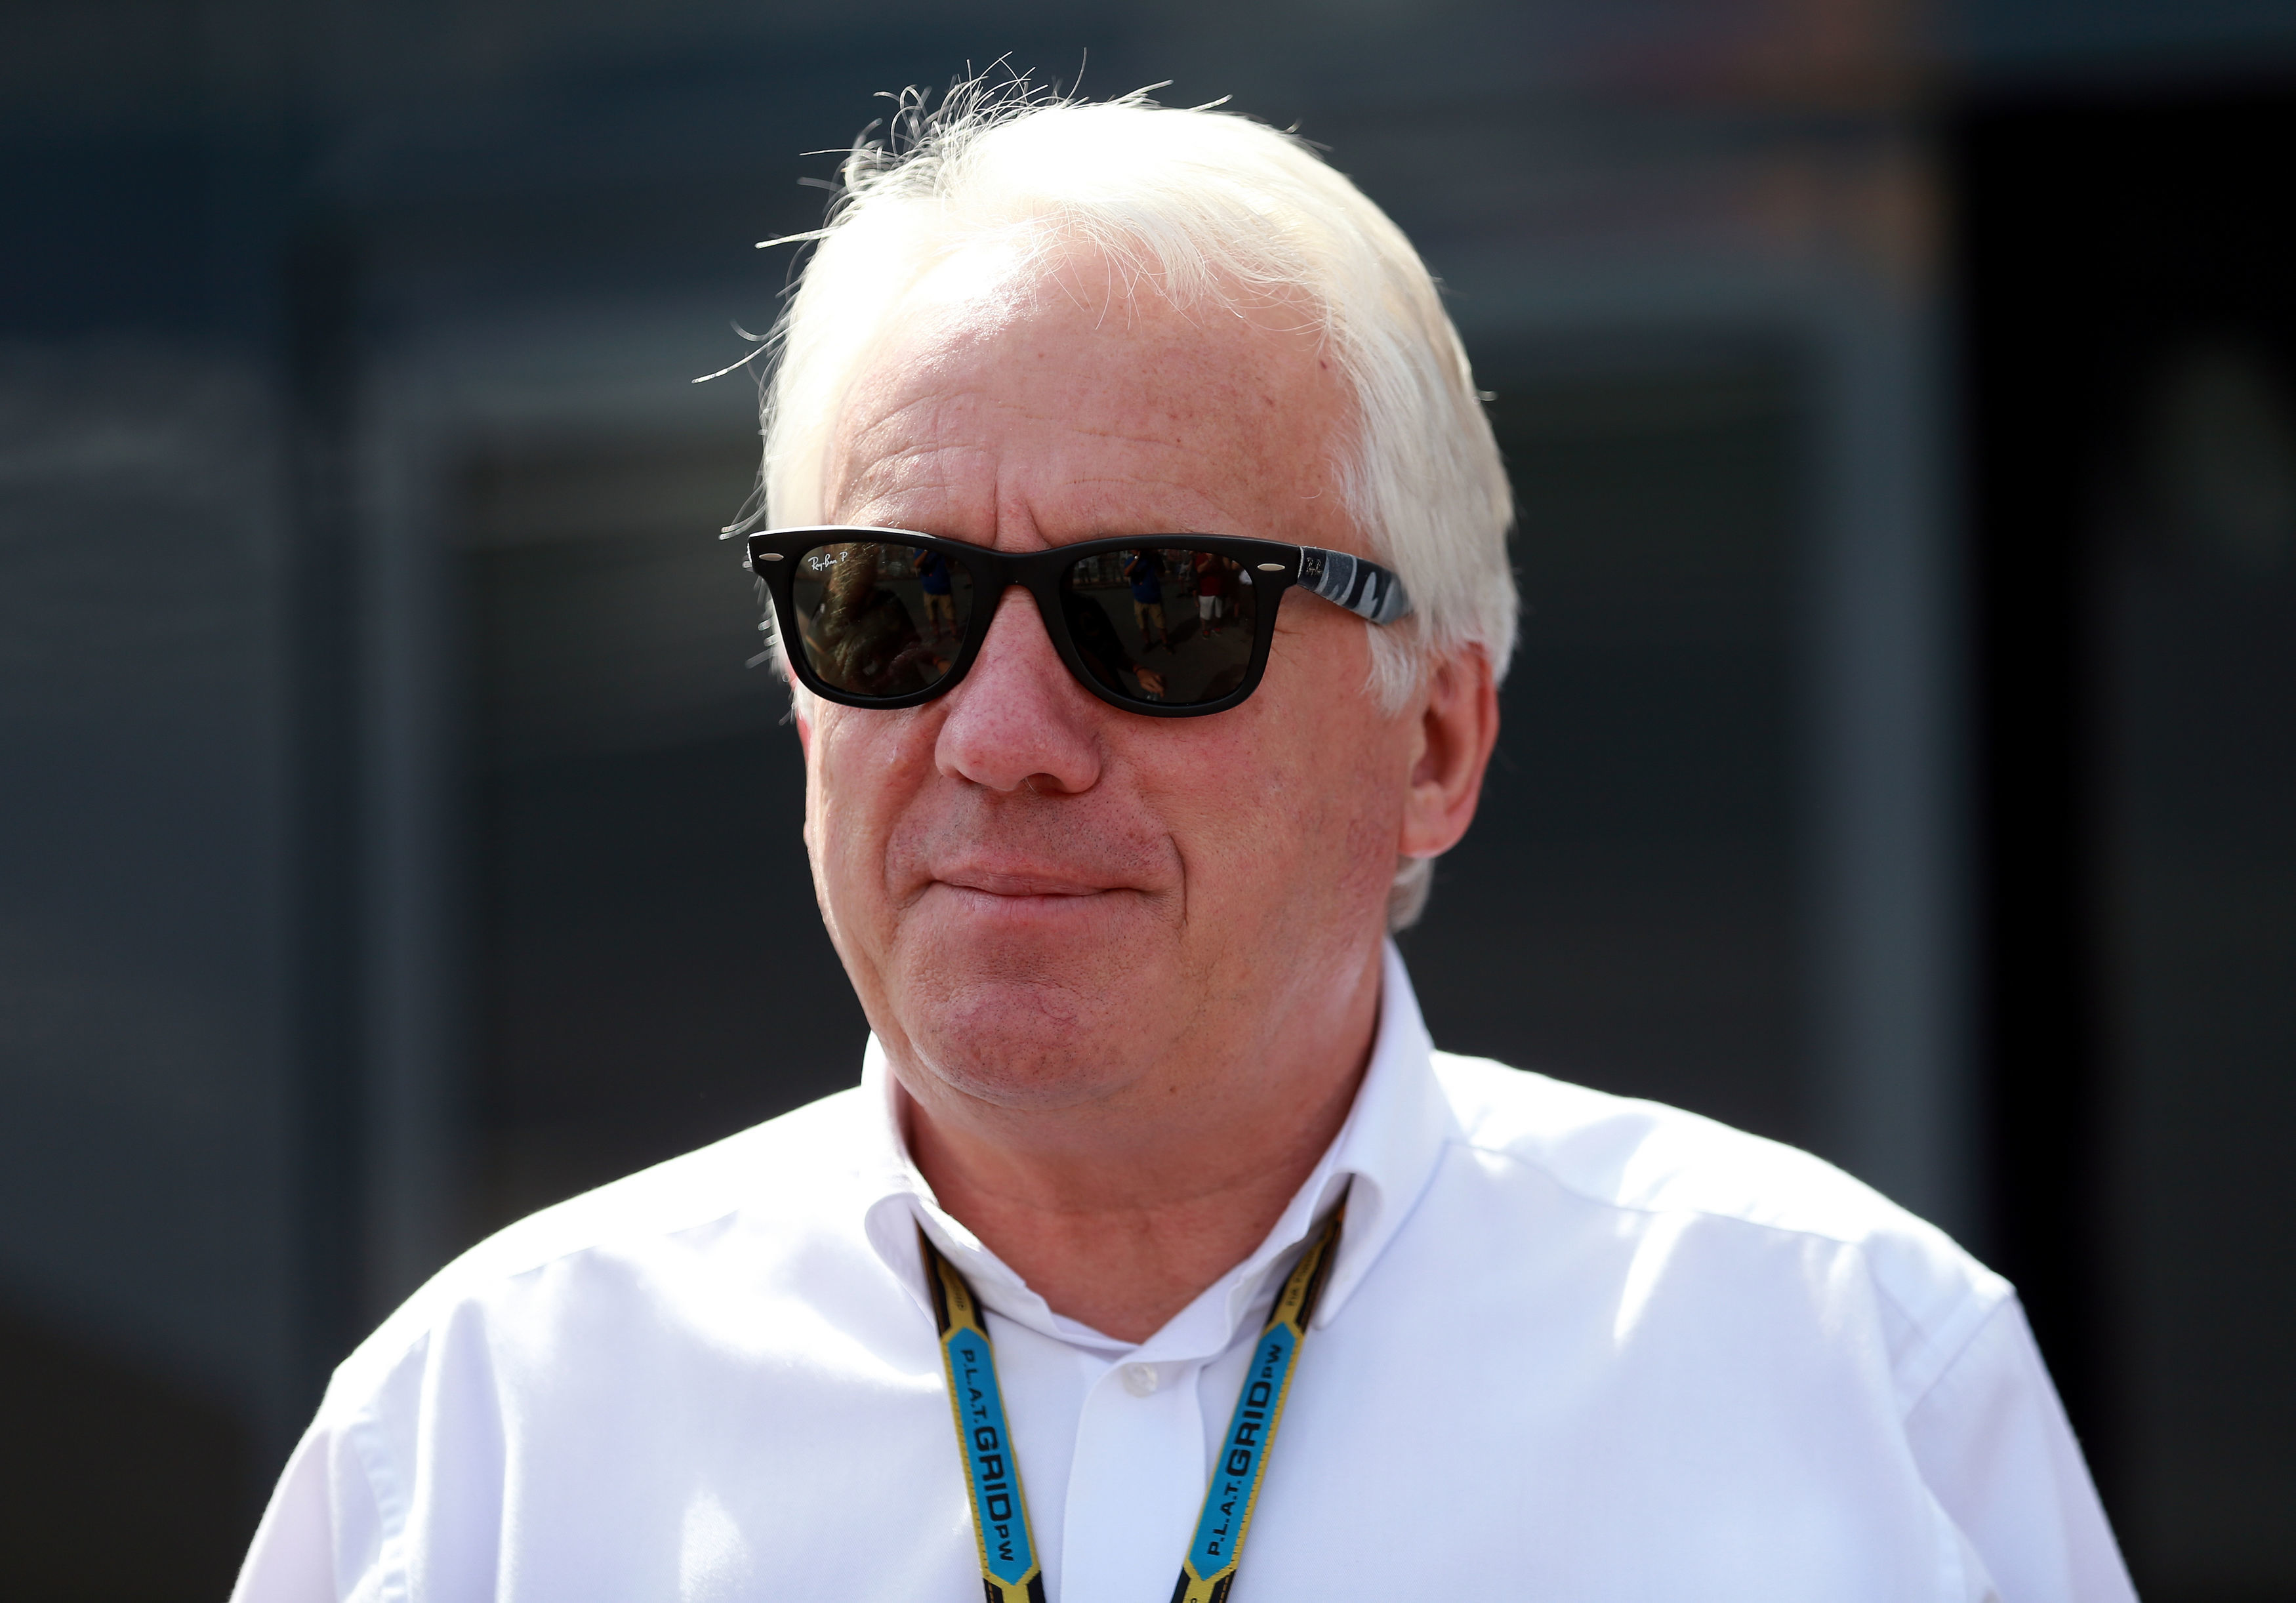 Article image for F1 race director Charlie Whiting has died on the eve of the Melbourne Grand Prix